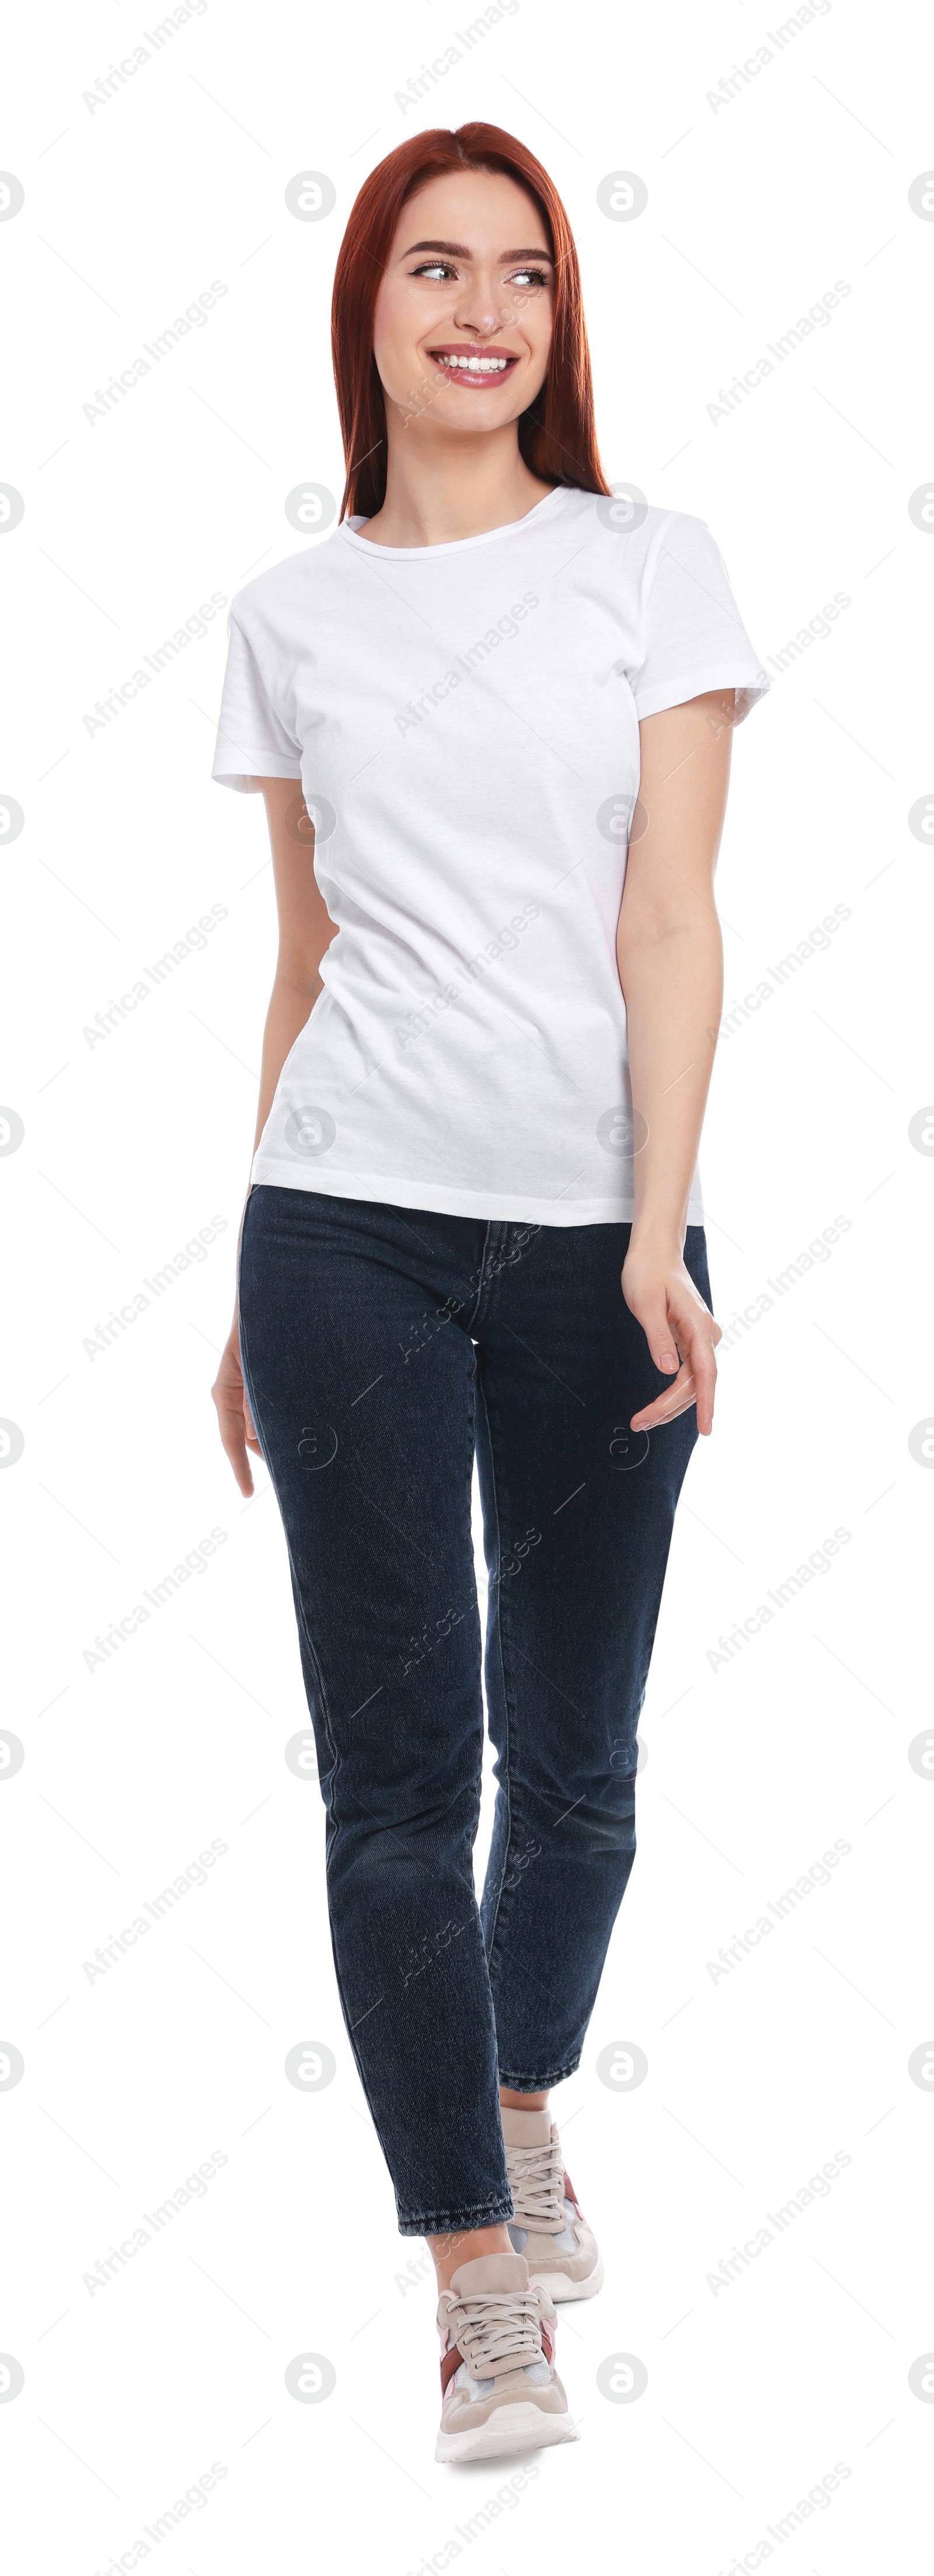 Photo of Happy woman with red dyed hair walking on white background